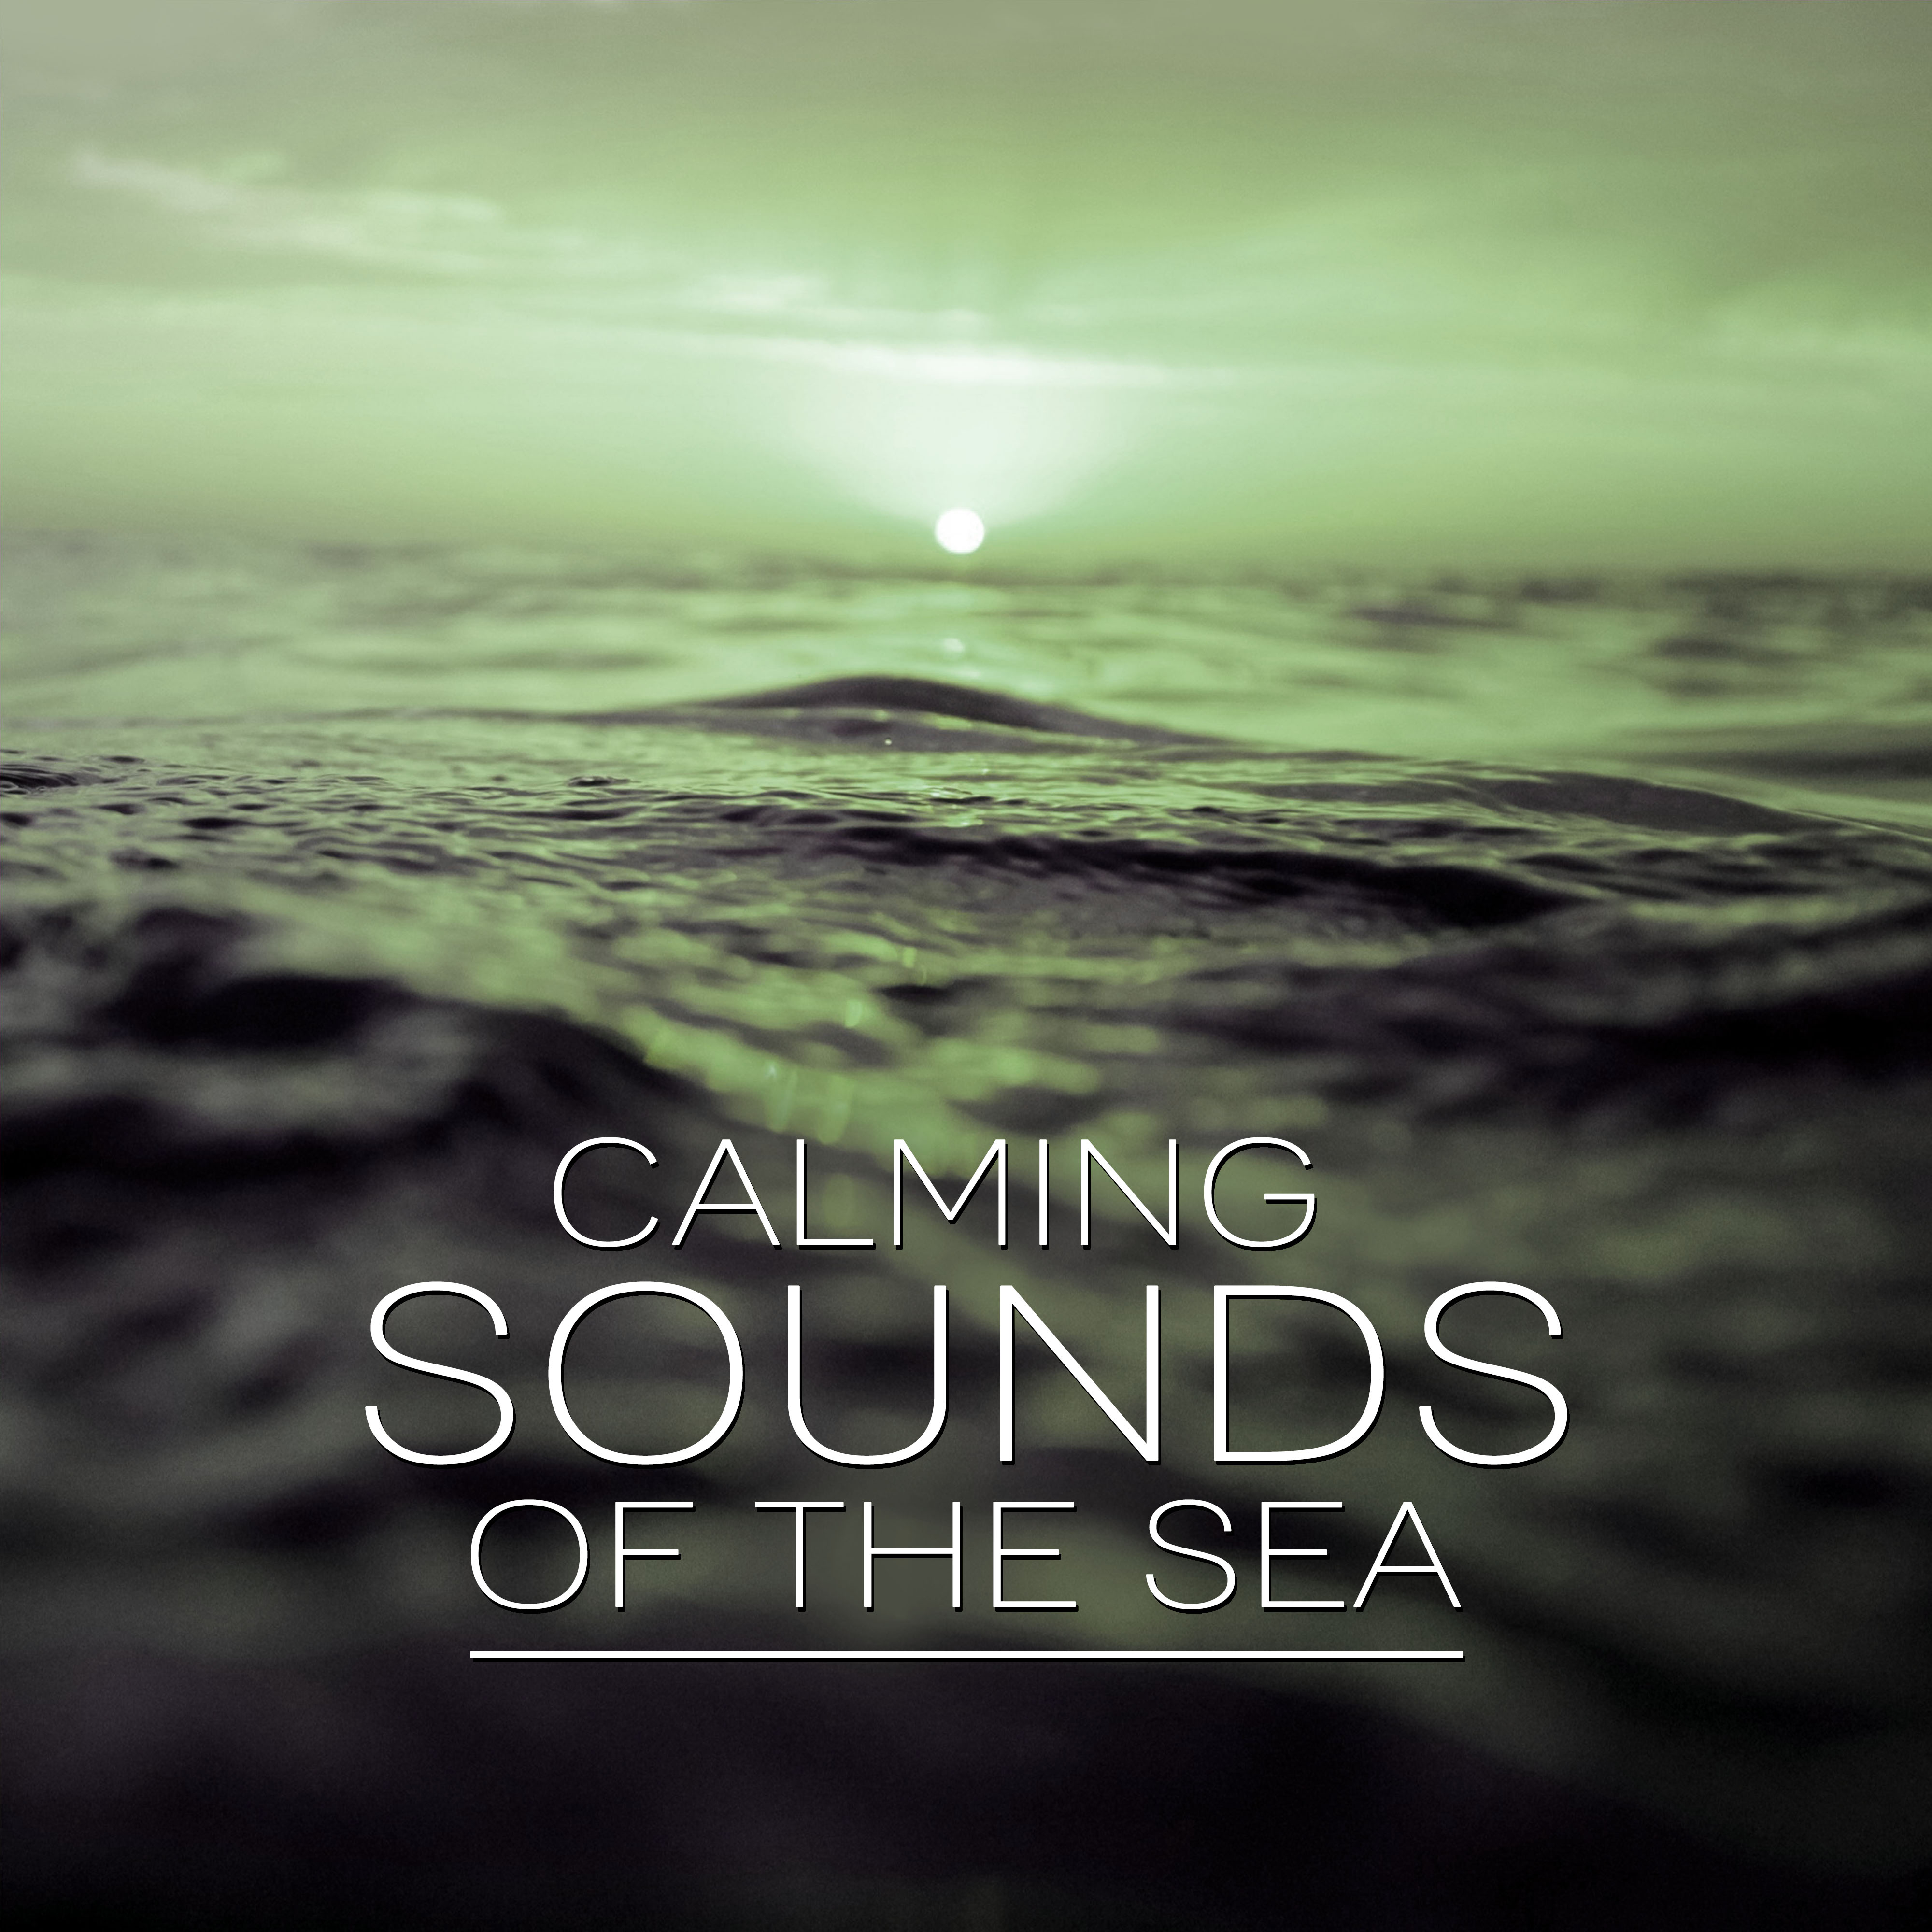 Calming Sounds of the Sea - Nature Sounds, White Noise, Hypnotherapy, Music Therapy, Nature Calming Sounds, Sleep Hypnosis